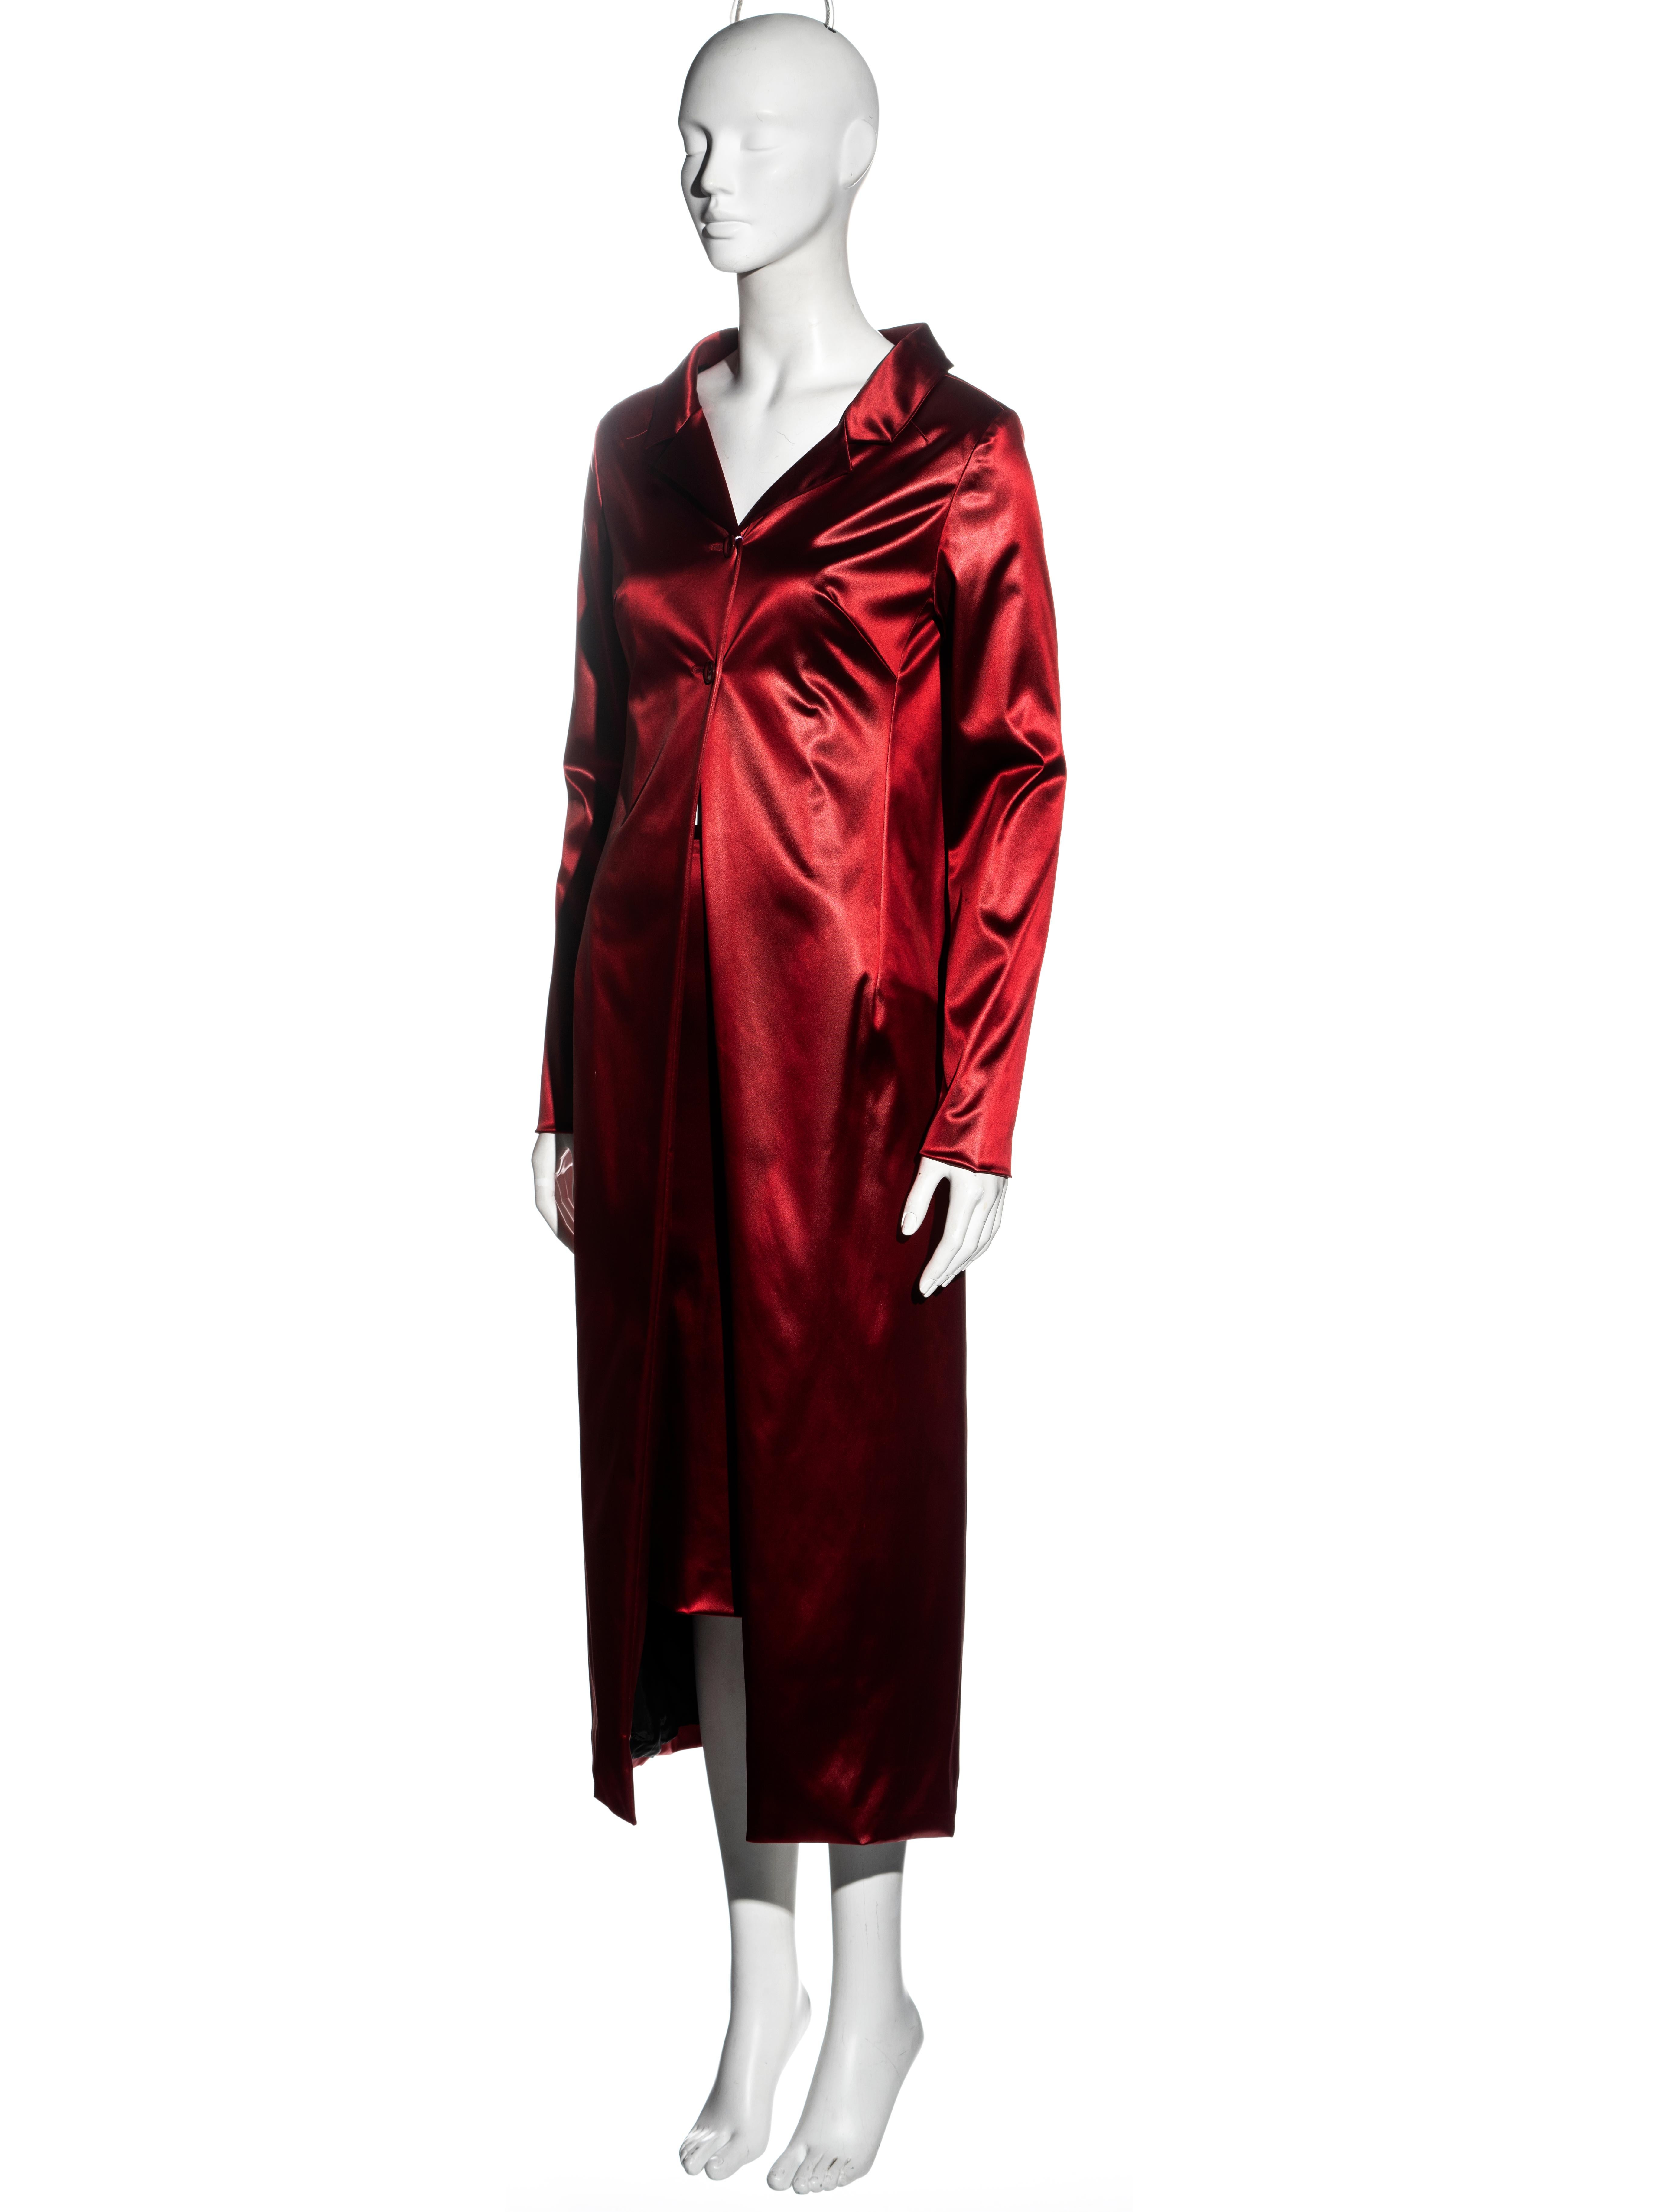 Dolce & Gabbana red stretch-satin coat and skirt set, ss 1999 In Excellent Condition For Sale In London, GB